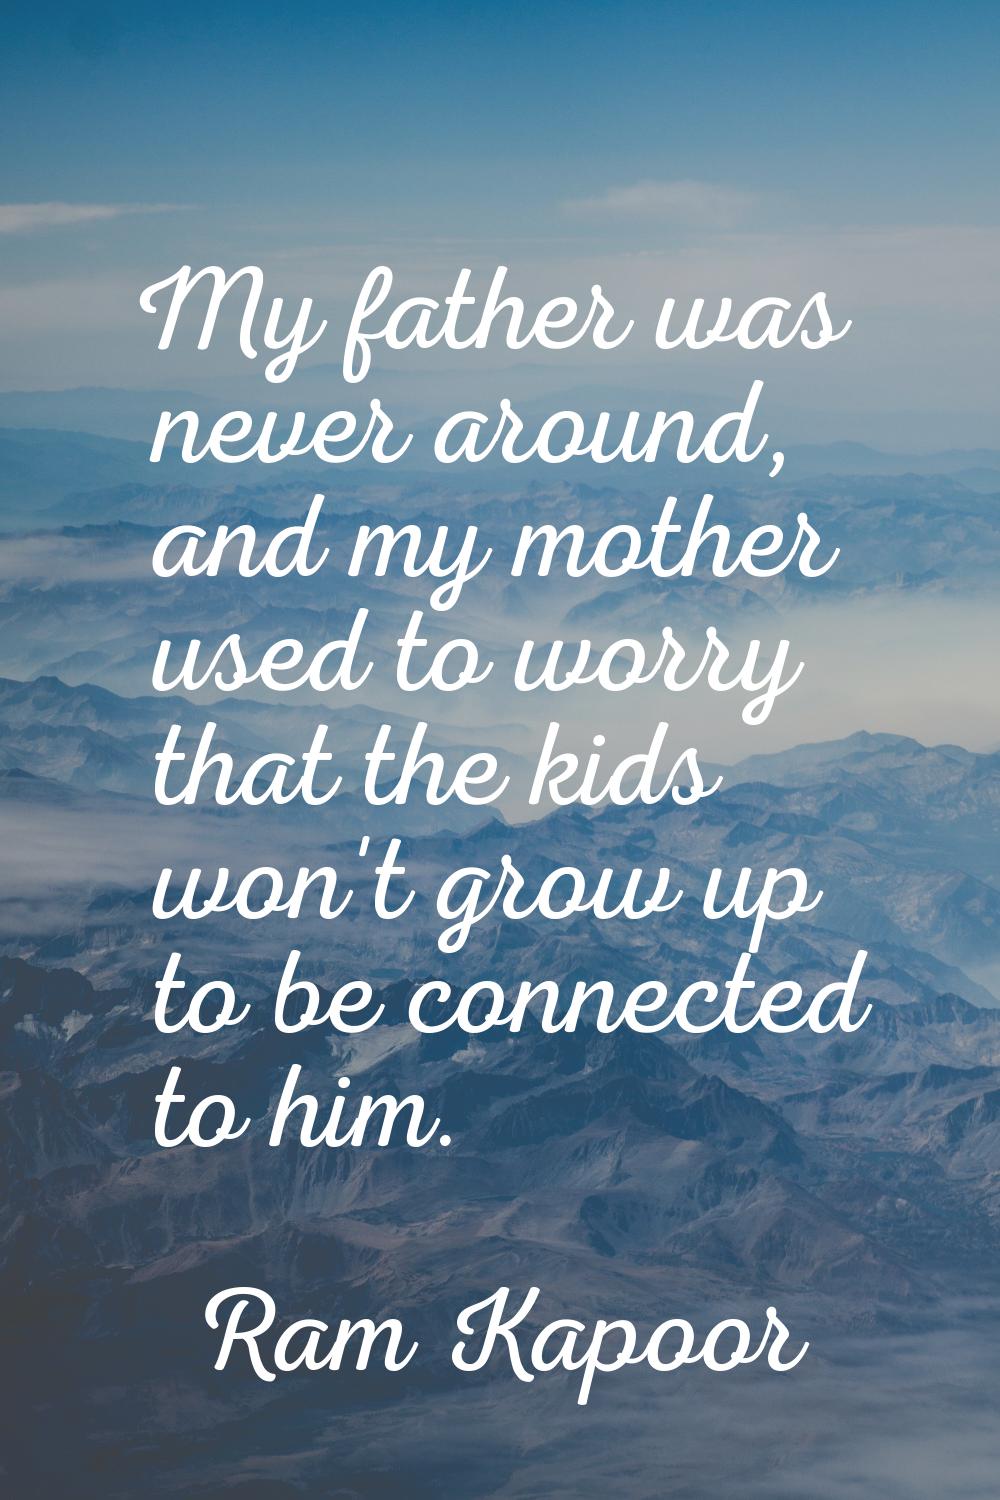 My father was never around, and my mother used to worry that the kids won't grow up to be connected